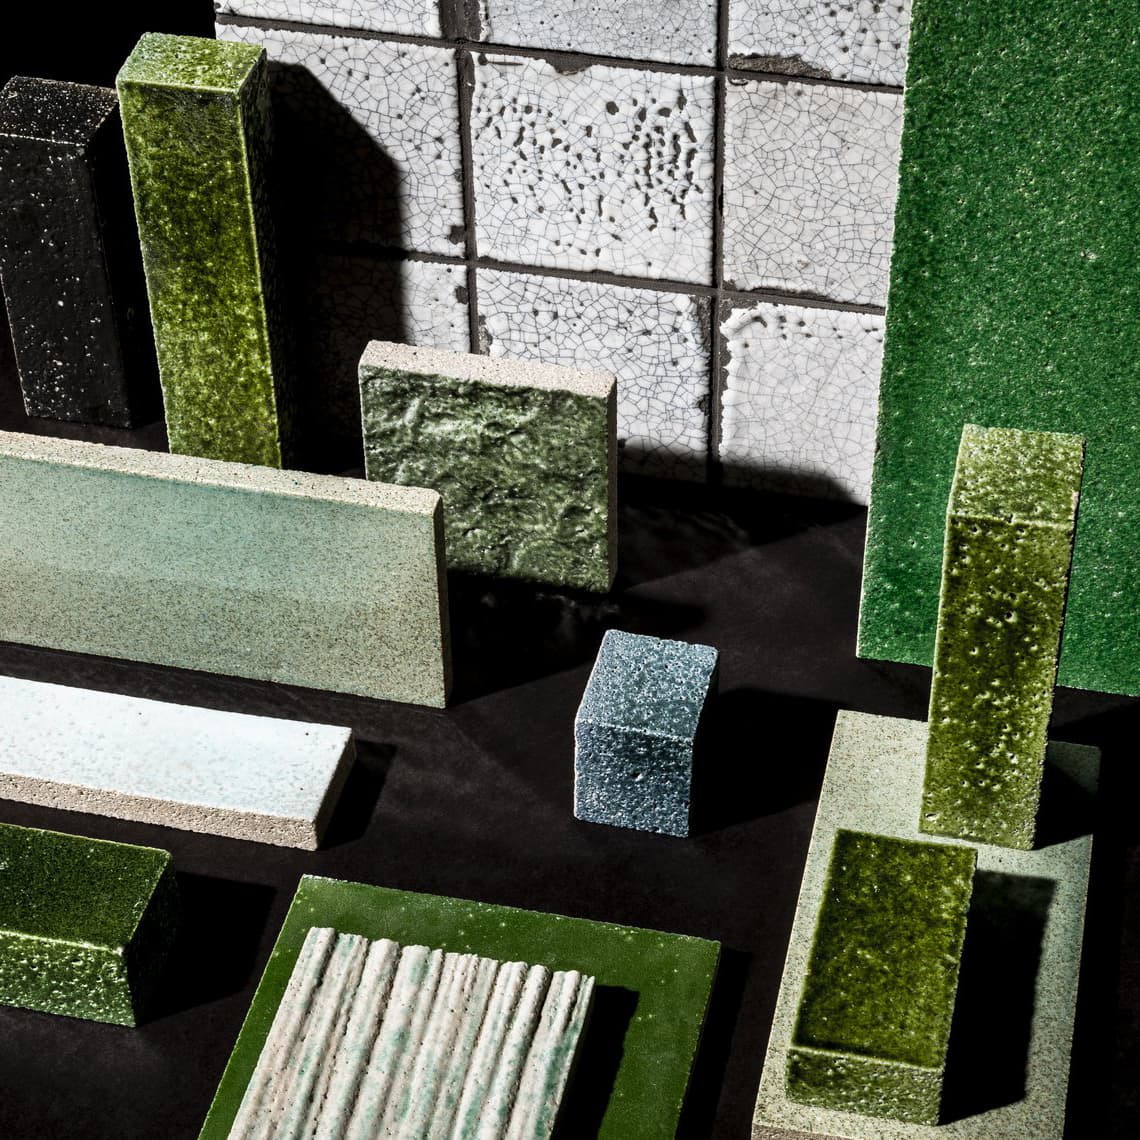 silicastone-samples-crackled-surface-green-InsideOutContracts.jpg#asset:194796